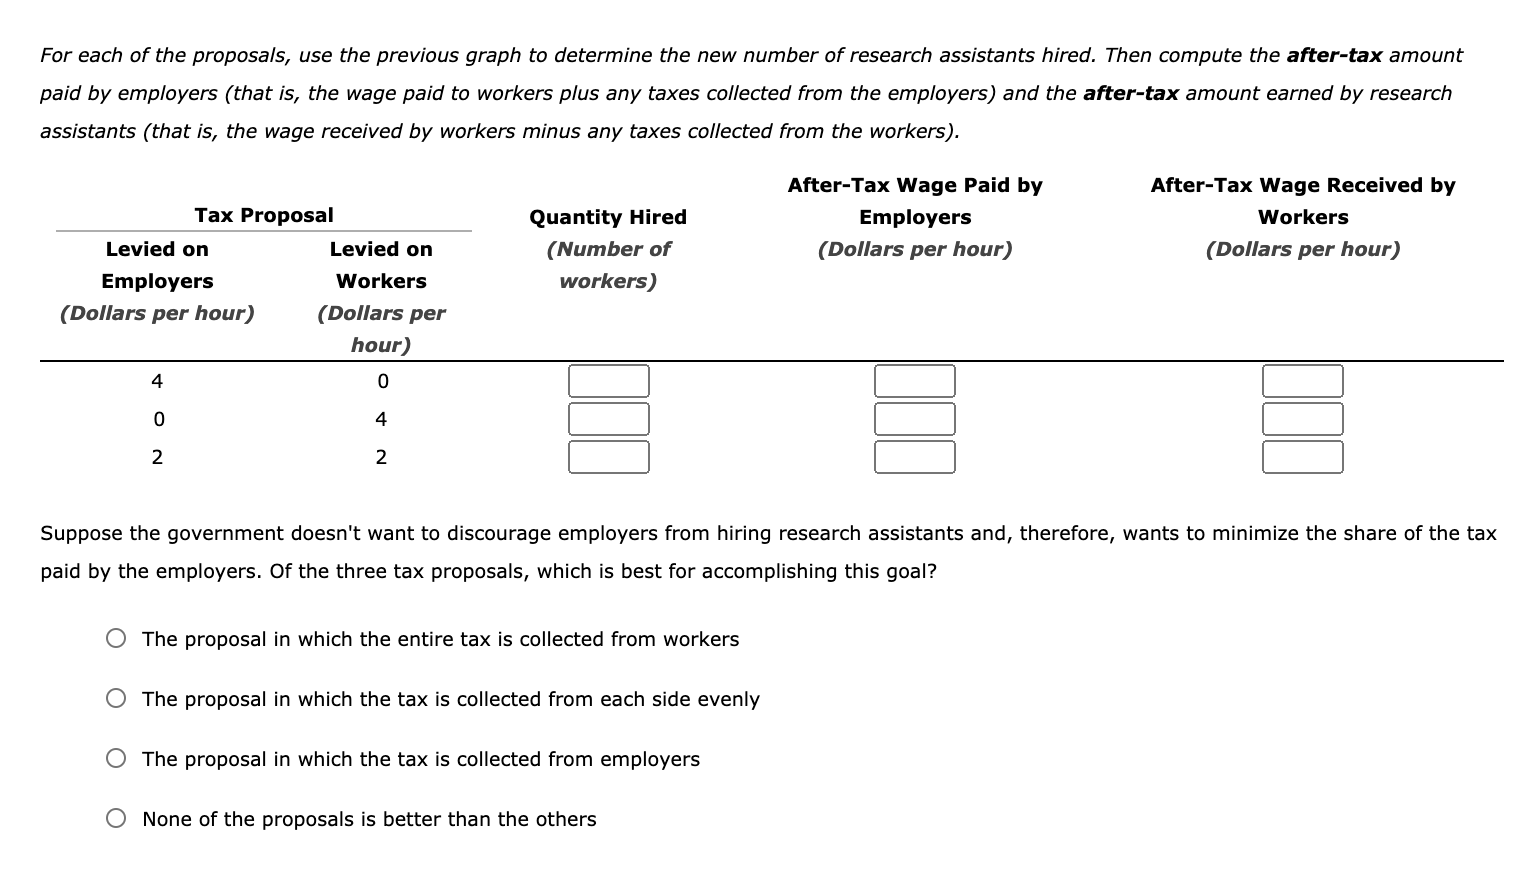 For each of the proposals, use the previous graph to determine the new number of research assistants hired. Then compute the after-tax amount
paid by employers (that is, the wage paid to workers plus any taxes collected from the employers) and the after-tax amount earned by research
assistants (that is, the wage received by workers minus any taxes collected from the workers).
After-Tax Wage Paid by
After-Tax Wage Received by
Tax Proposal
Quantity Hired
Employers
Workers
Levied on
Levied on
(Number of
(Dollars per hour)
(Dollars per hour)
Employers
Workers
workers)
(Dollars per hour)
(Dollars per
hour)
4
4
2
2
Suppose the government doesn't want to discourage employers from hiring research assistants and, therefore, wants to minimize the share of the tax
paid by the employers. Of the three tax proposals, which is best for accomplishing this goal?
